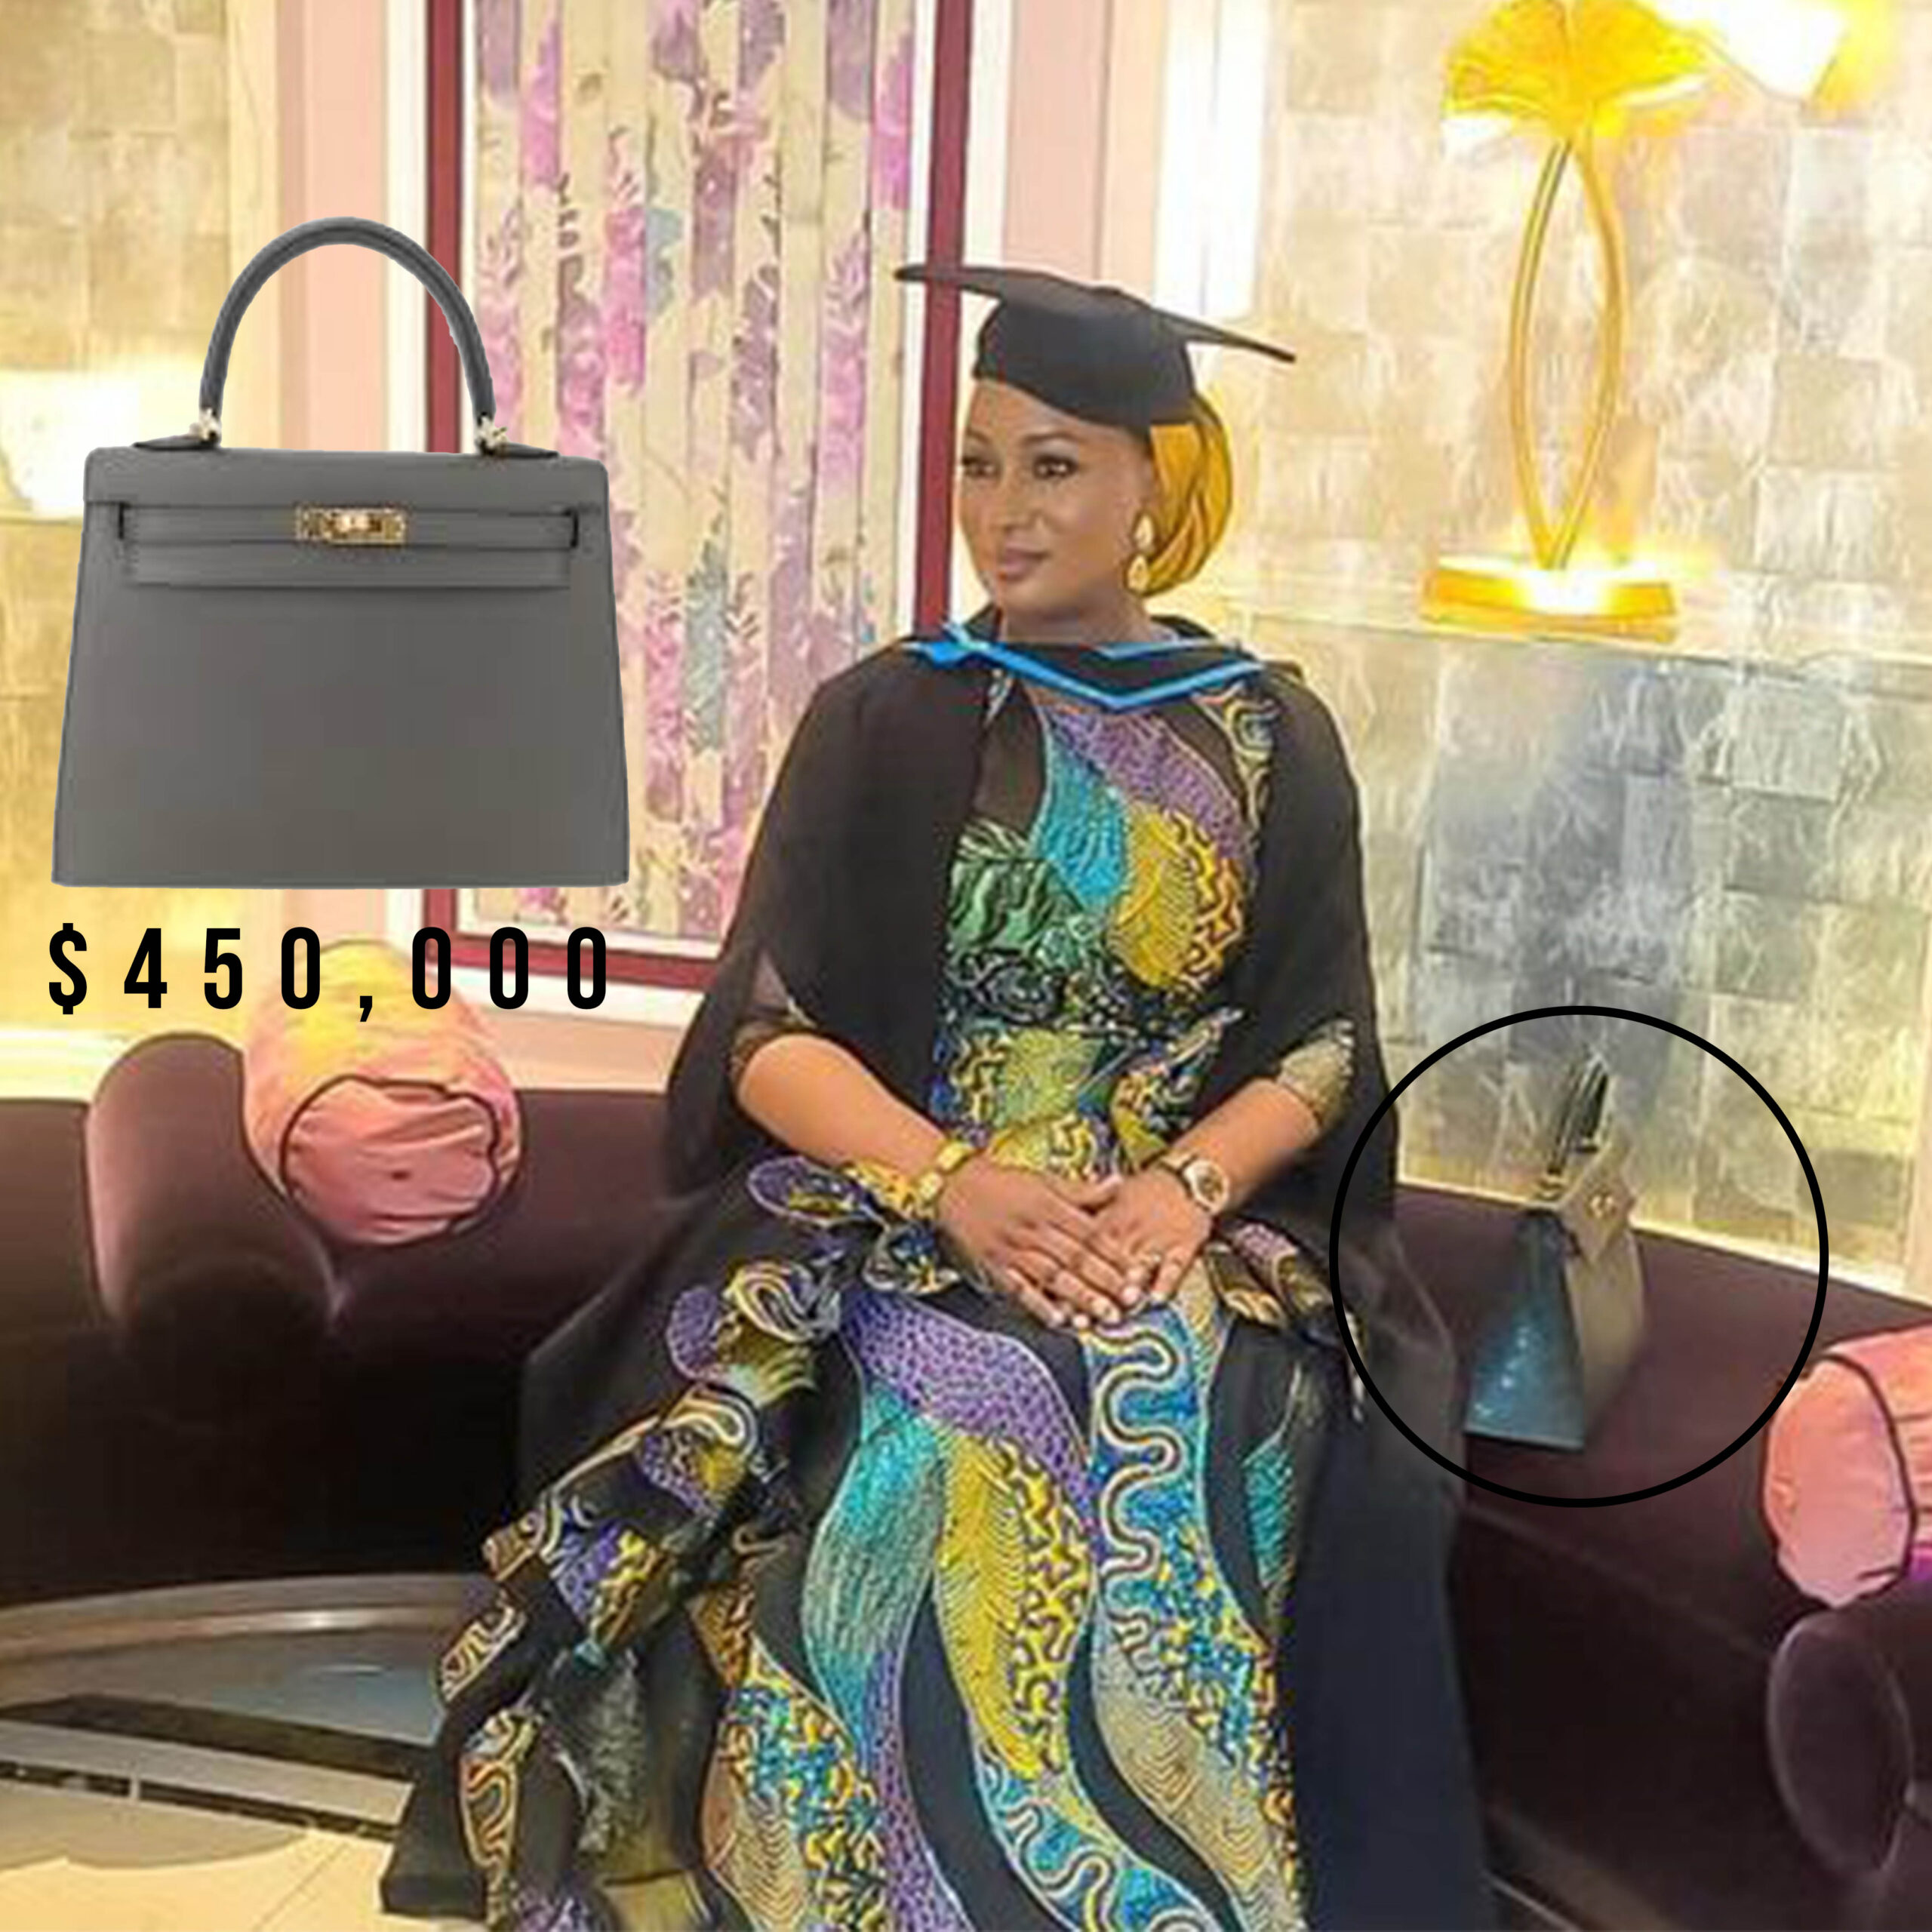 You are currently viewing ‘Thief’ Samira Bawumia should explain how she bought a bag worth $450,000 – CITEG